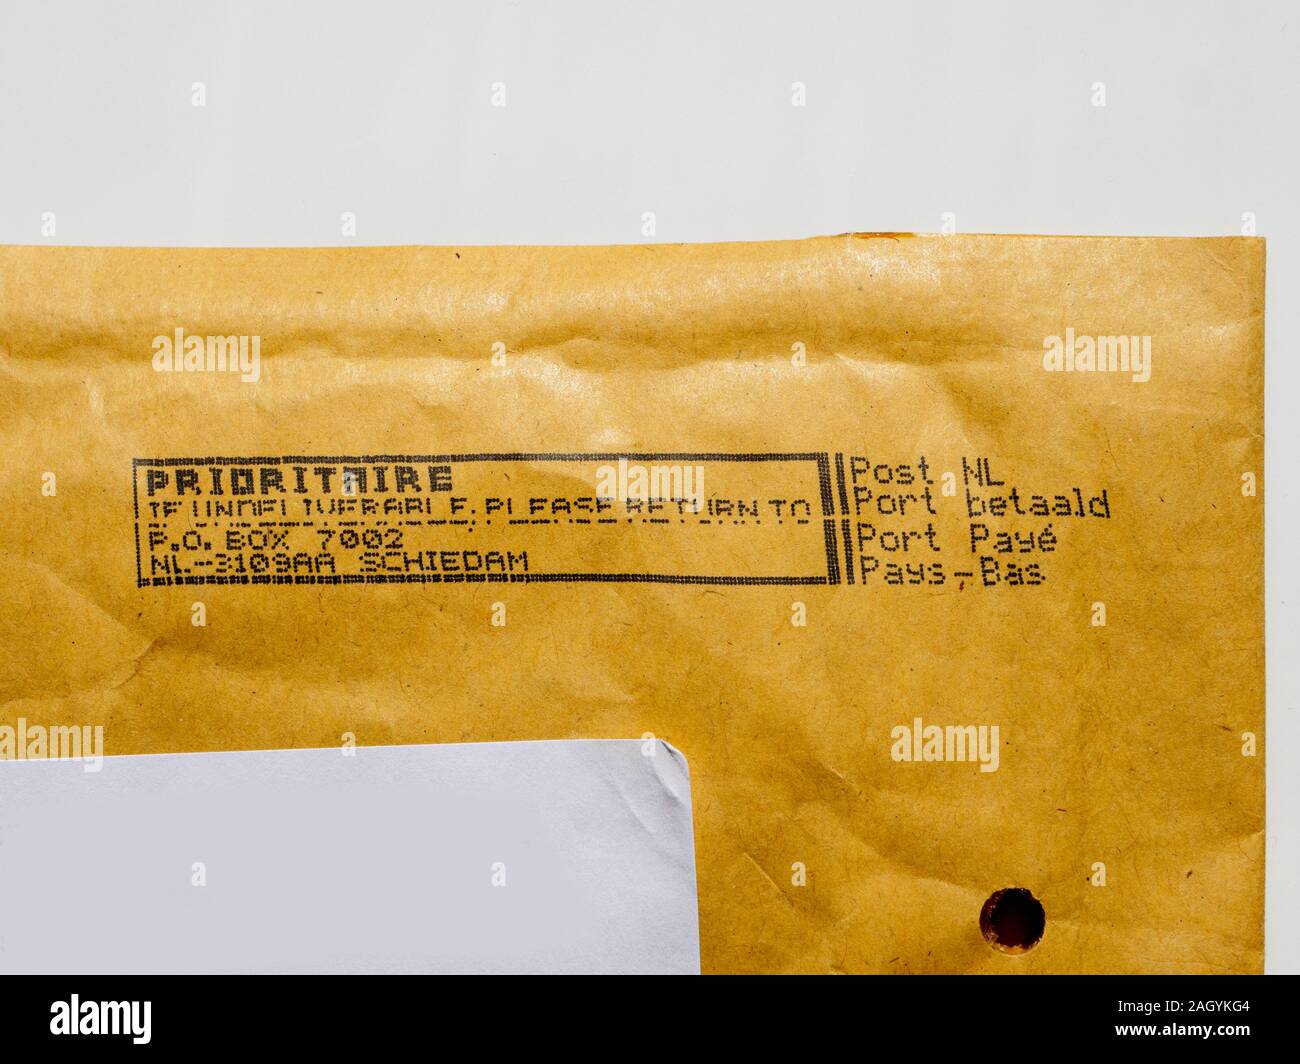 Amsterdam, Netherlands - Aug 9, 2017: Detail of business envelope from Post NL Netherlands postal service with Prioritaire stamp printed on dot matrix printer Stock Photo